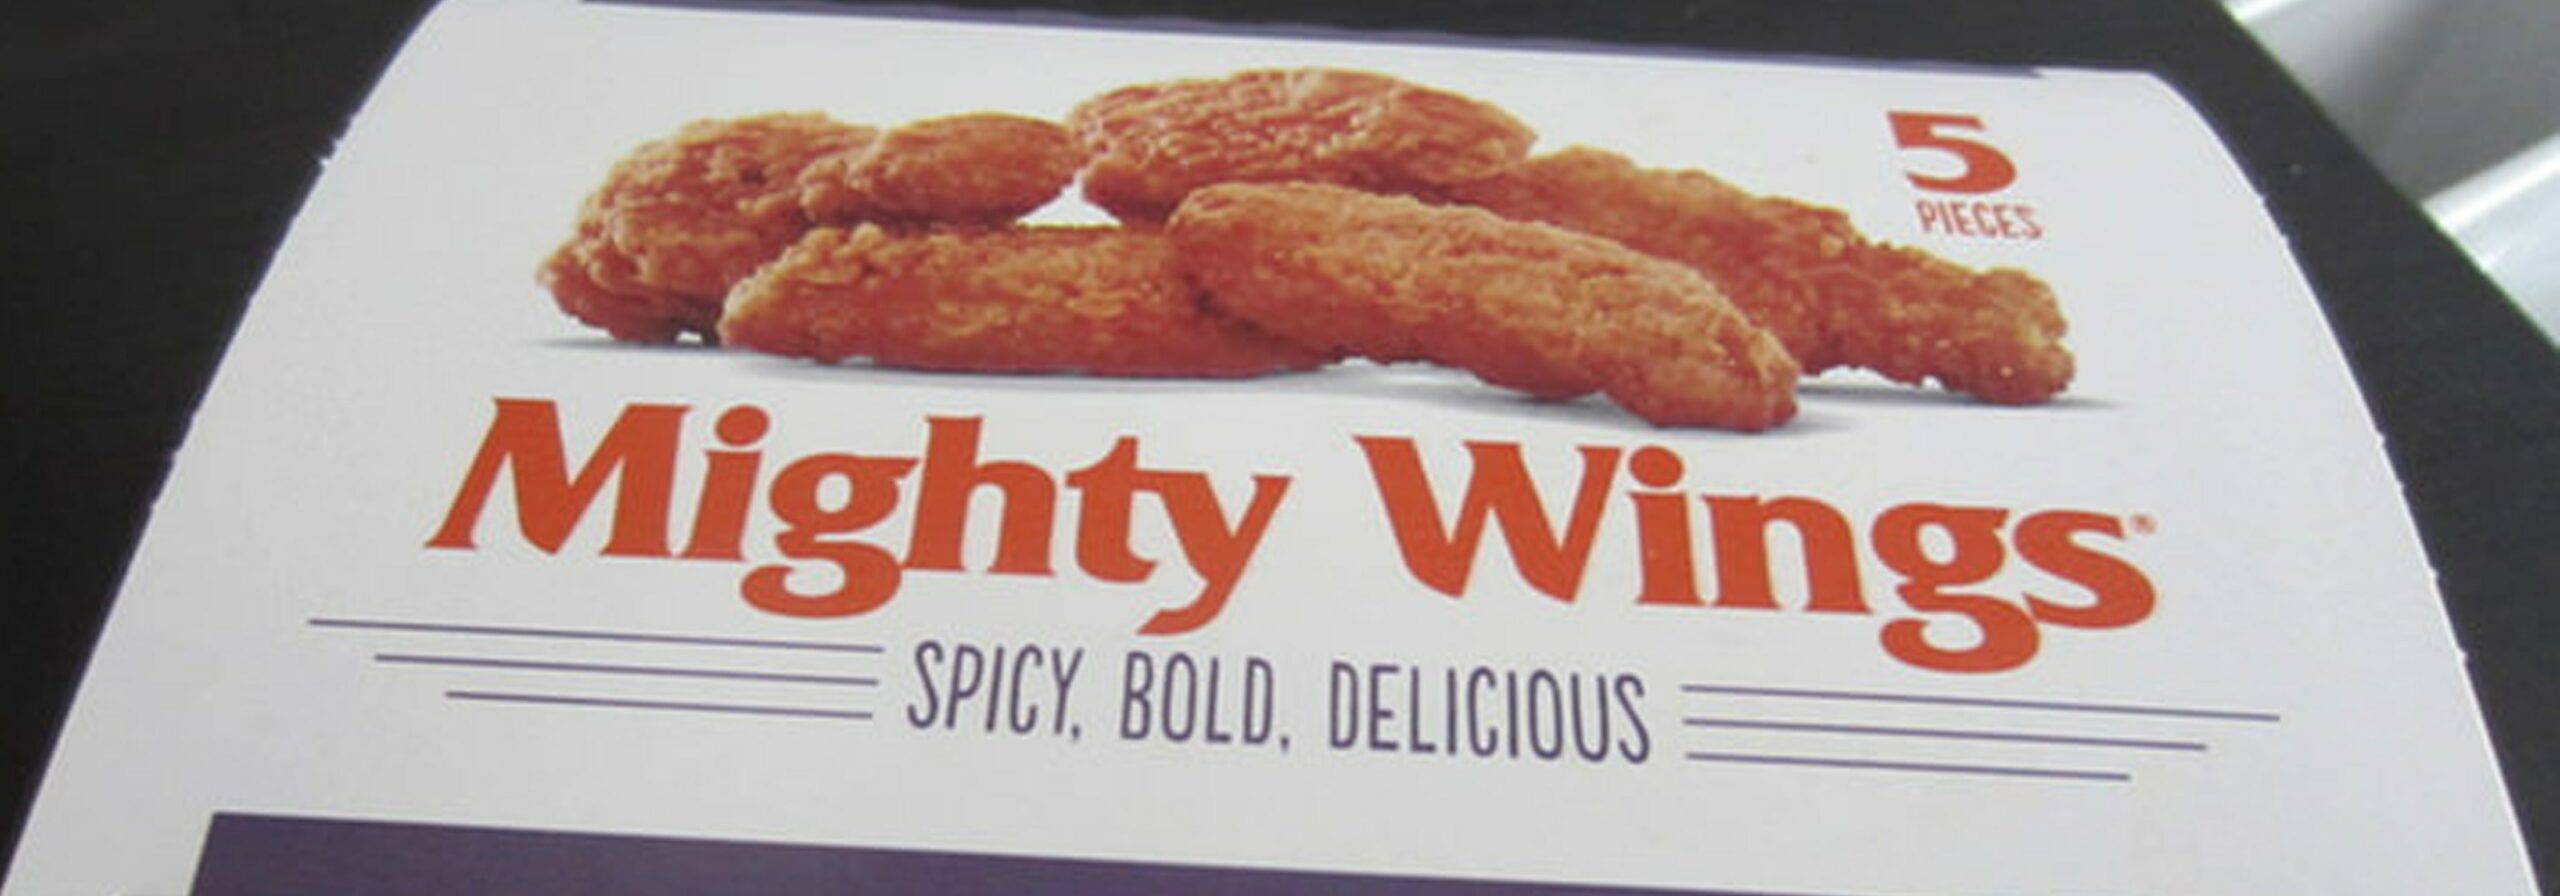 McDonald's Mighty Wings